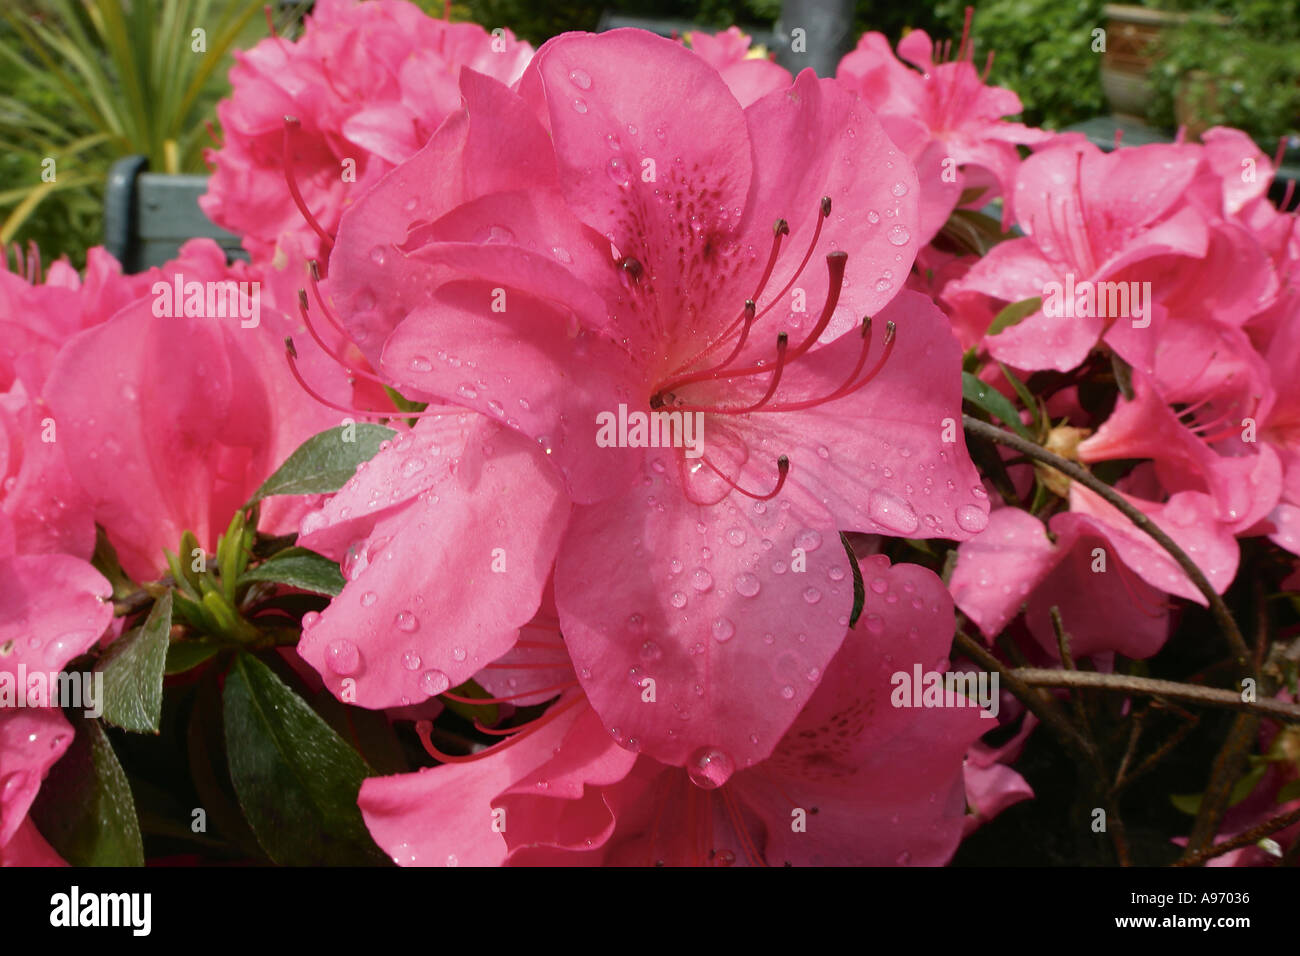 Rhododendron pink flowers Stock Photo